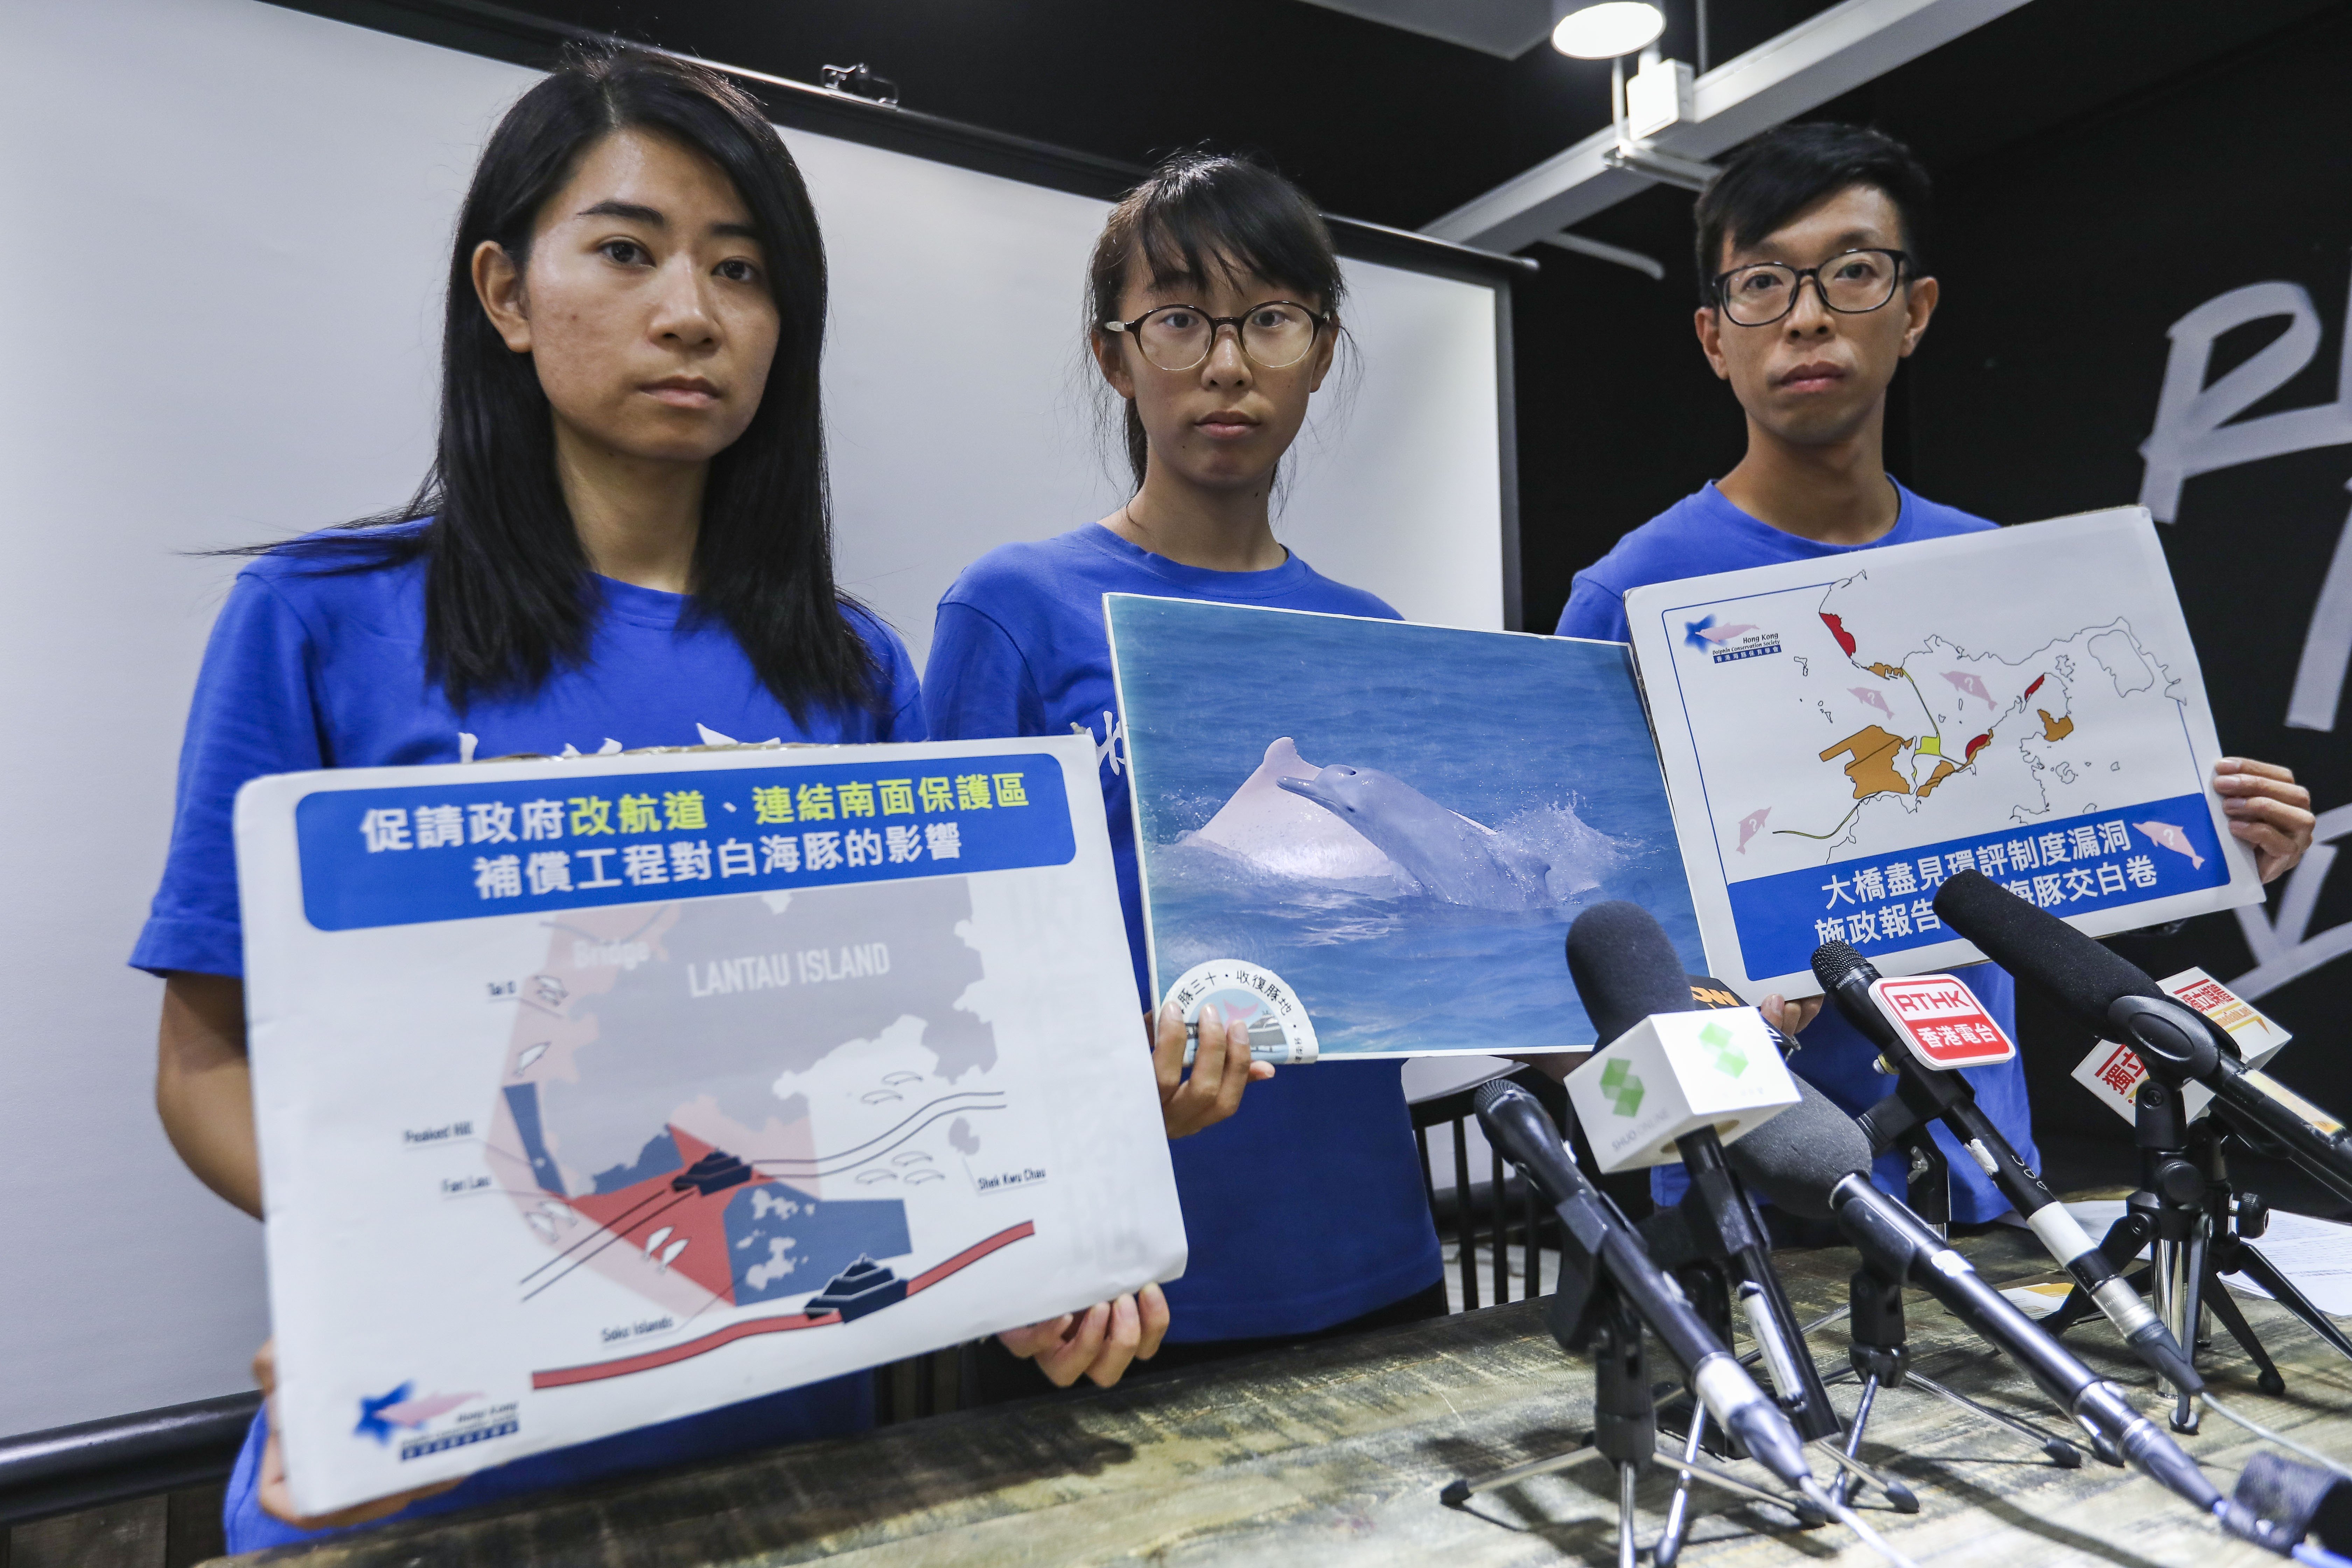 Members of the Hong Kong Dolphin Conservation Society call upon the government to conserve marine life before developing a new artificial island off Lantau, in Mong Kok on October 22. Photo: Nora Tam